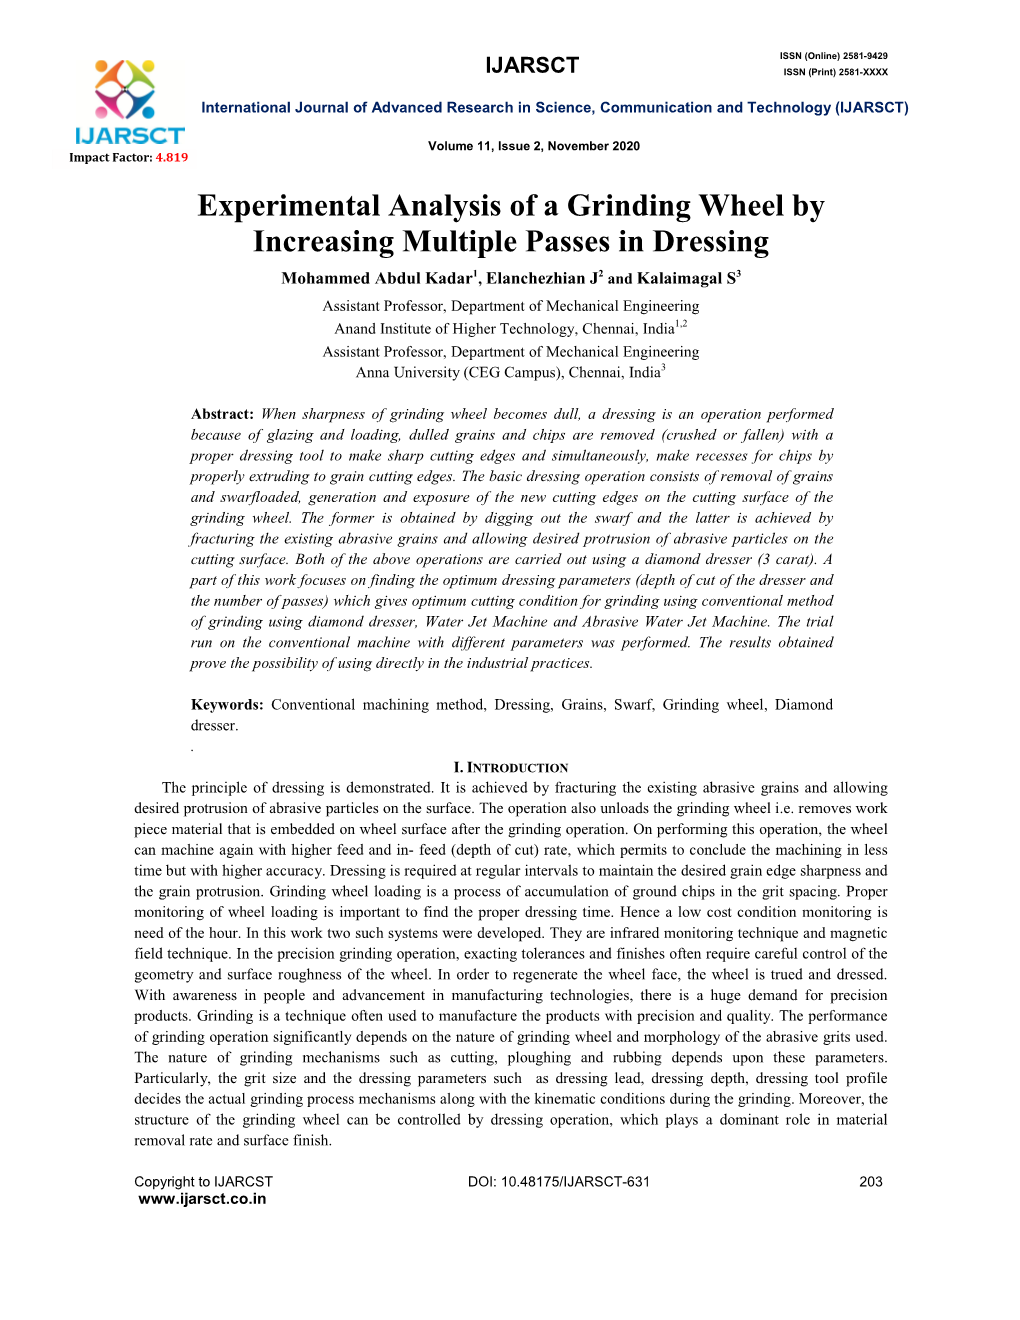 Experimental Analysis of a Grinding Wheel by Increasing Multiple